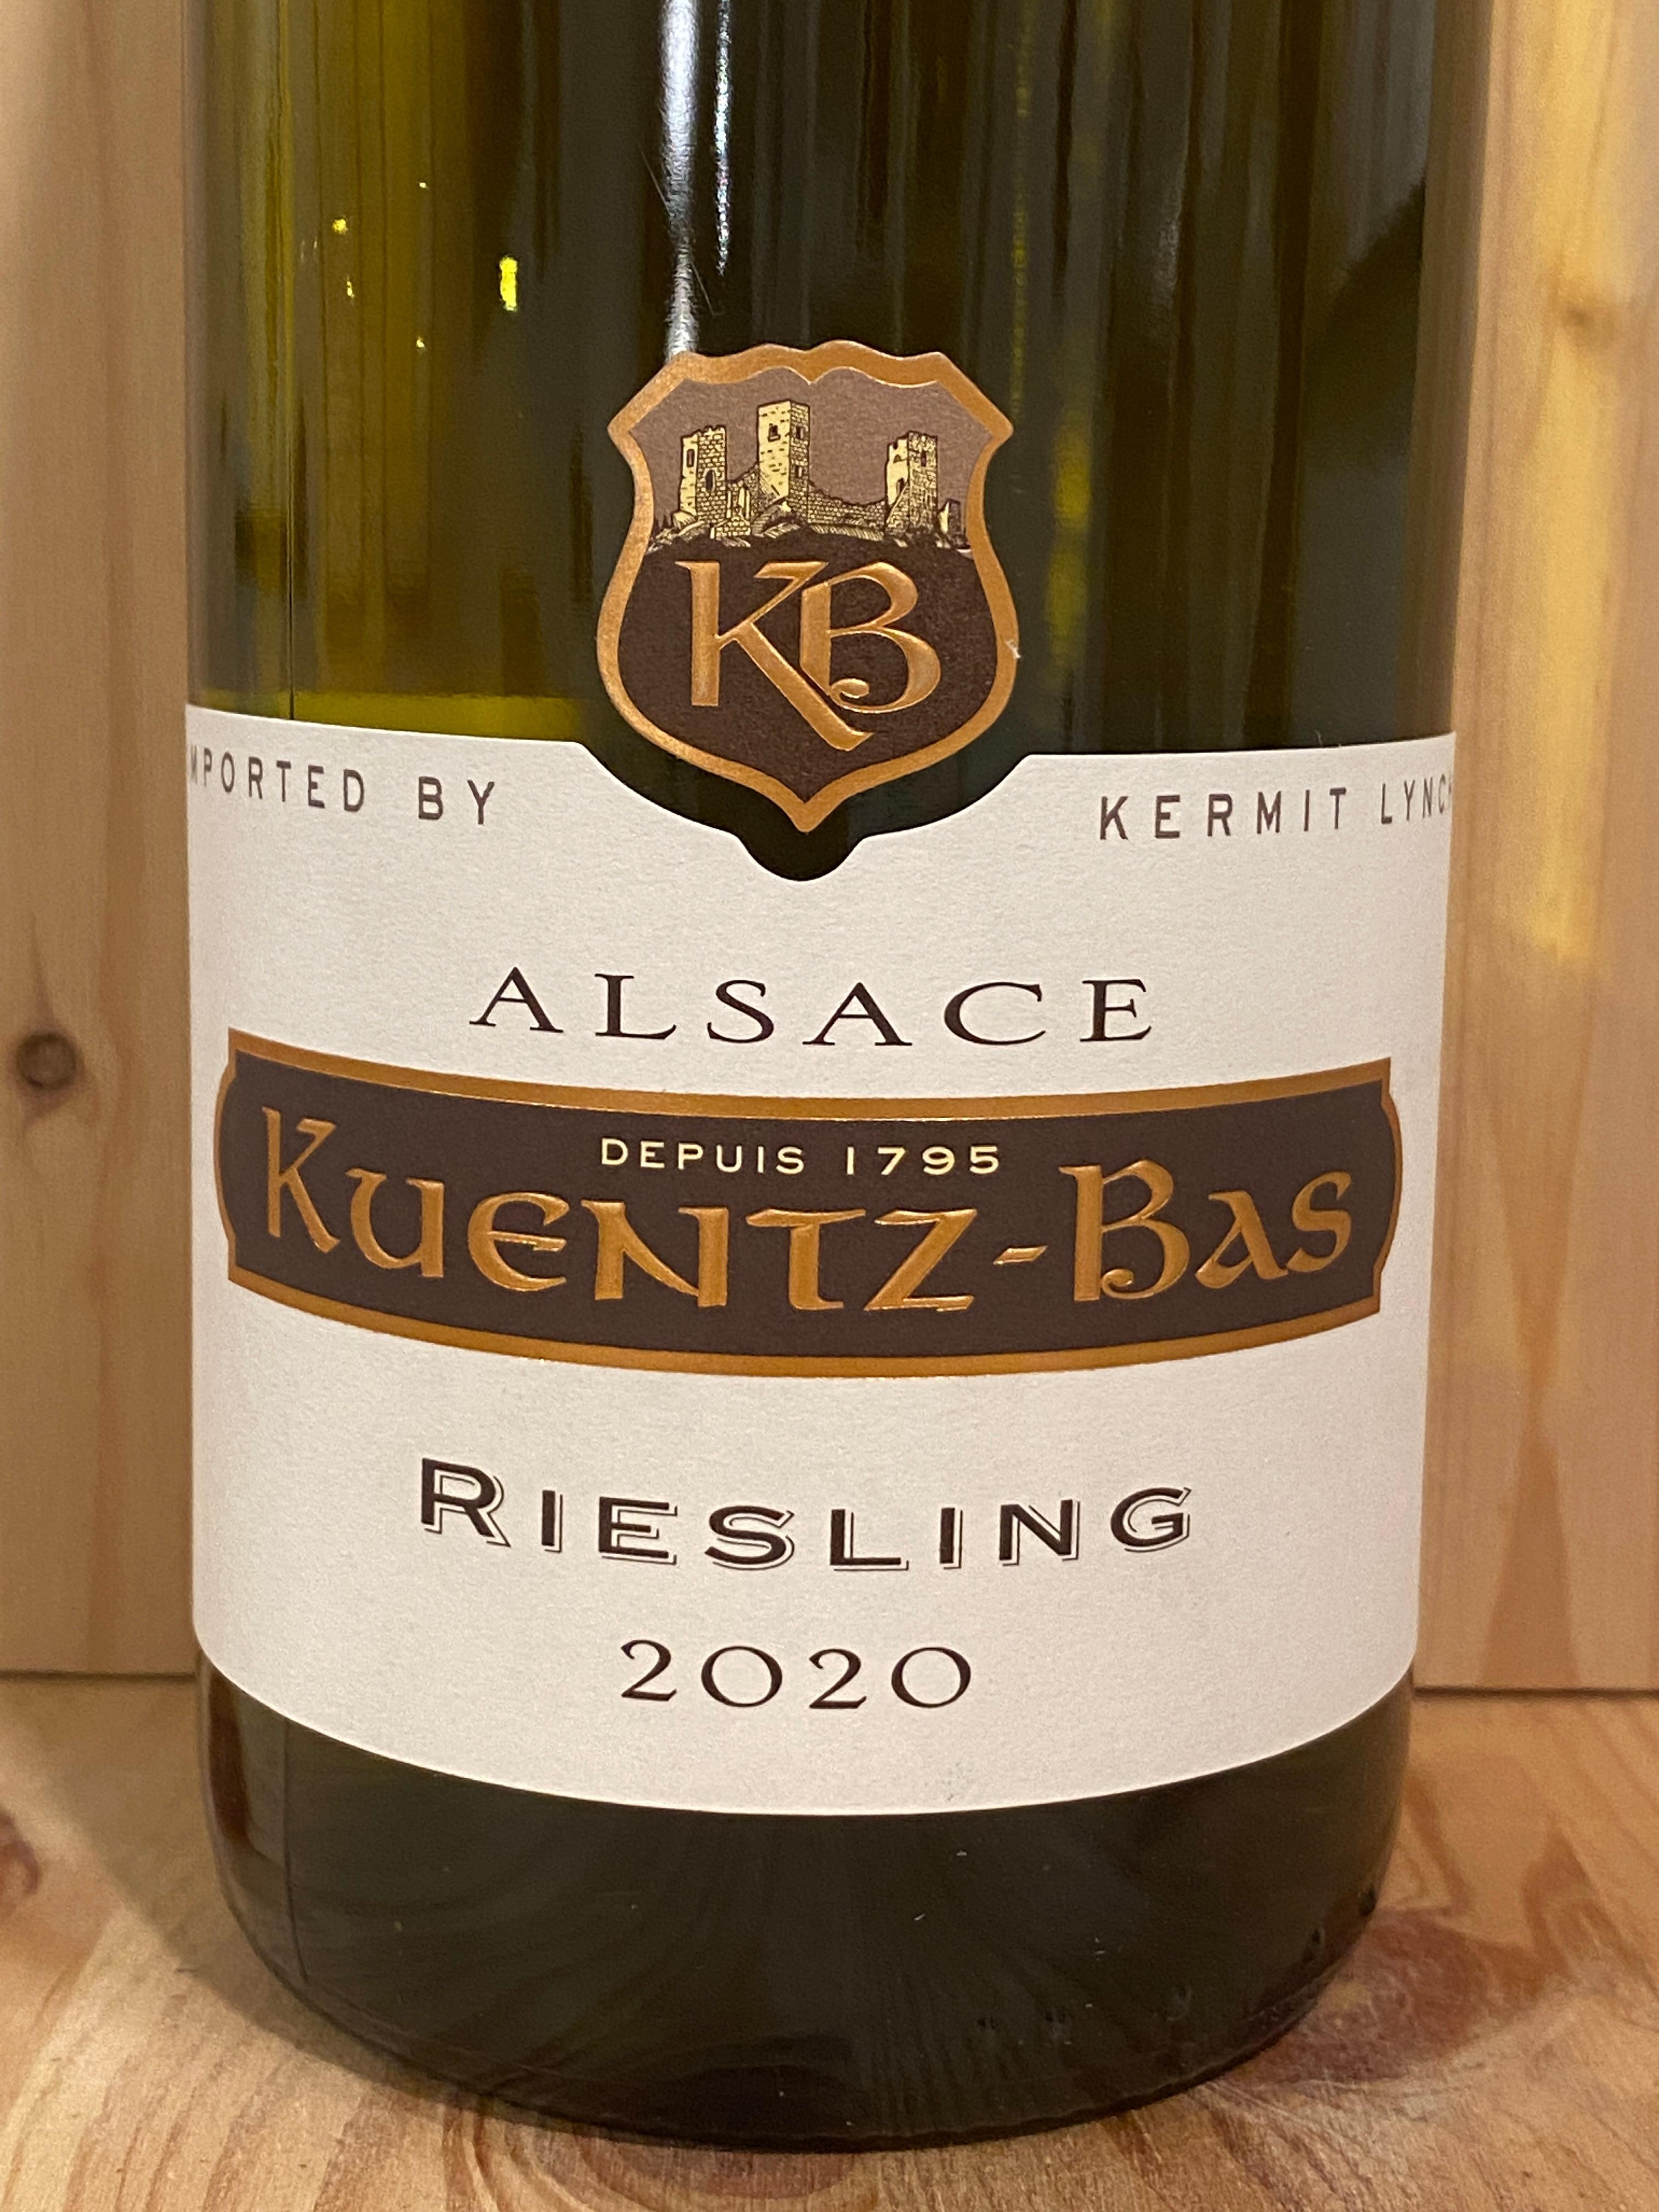 Kuentz-Bas "Tradition" Riesling 2020: Alsace, France